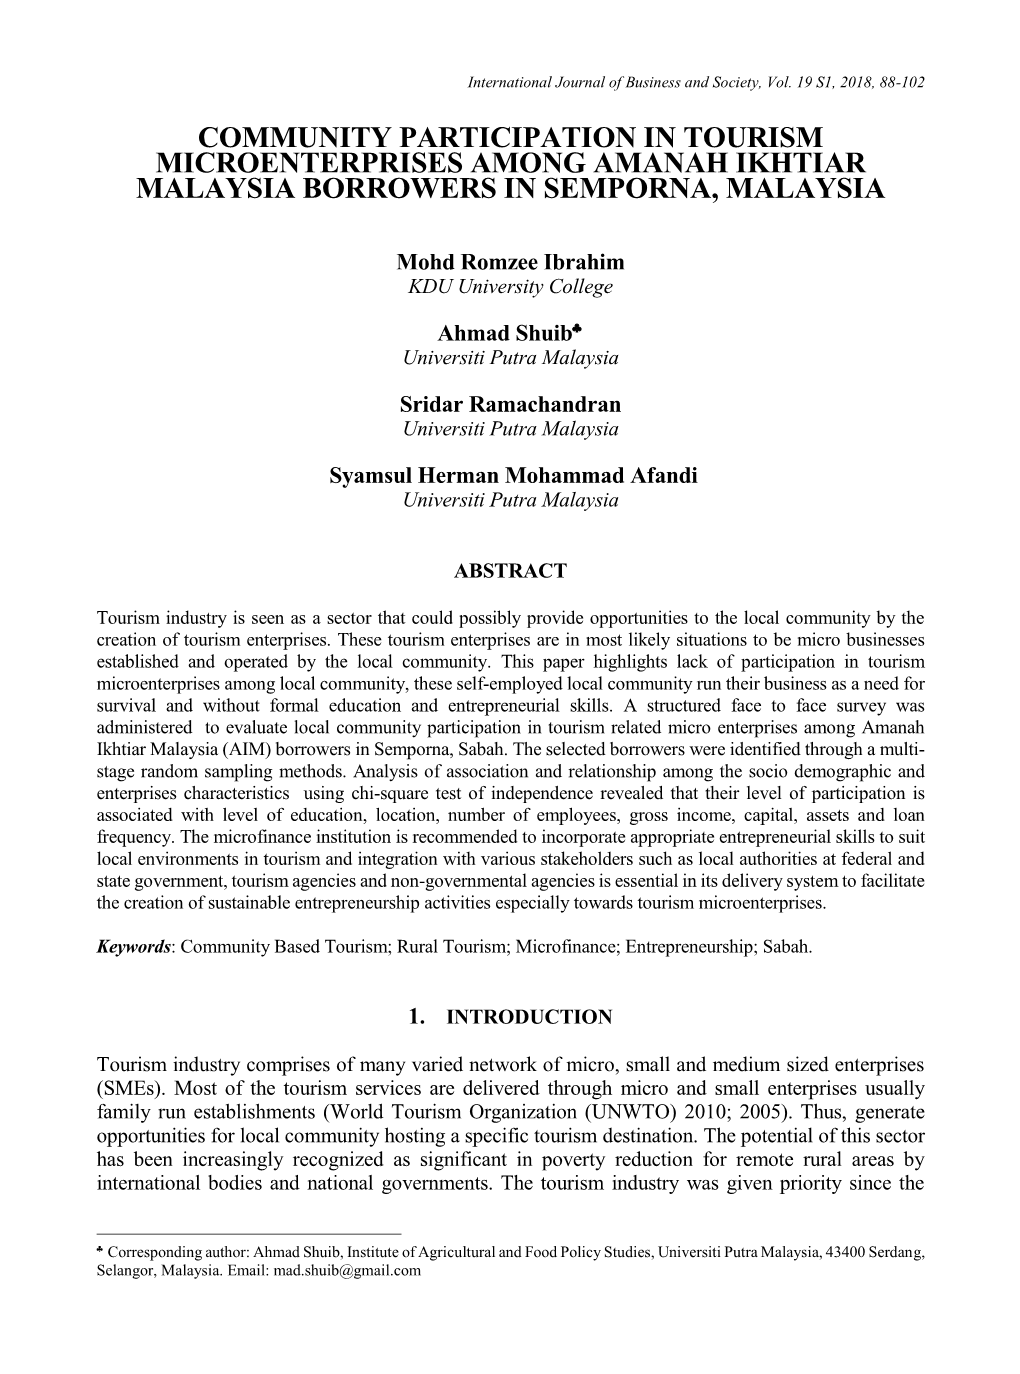 Community Participation in Tourism Microenterprises Among Amanah Ikhtiar Malaysia Borrowers in Semporna, Malaysia